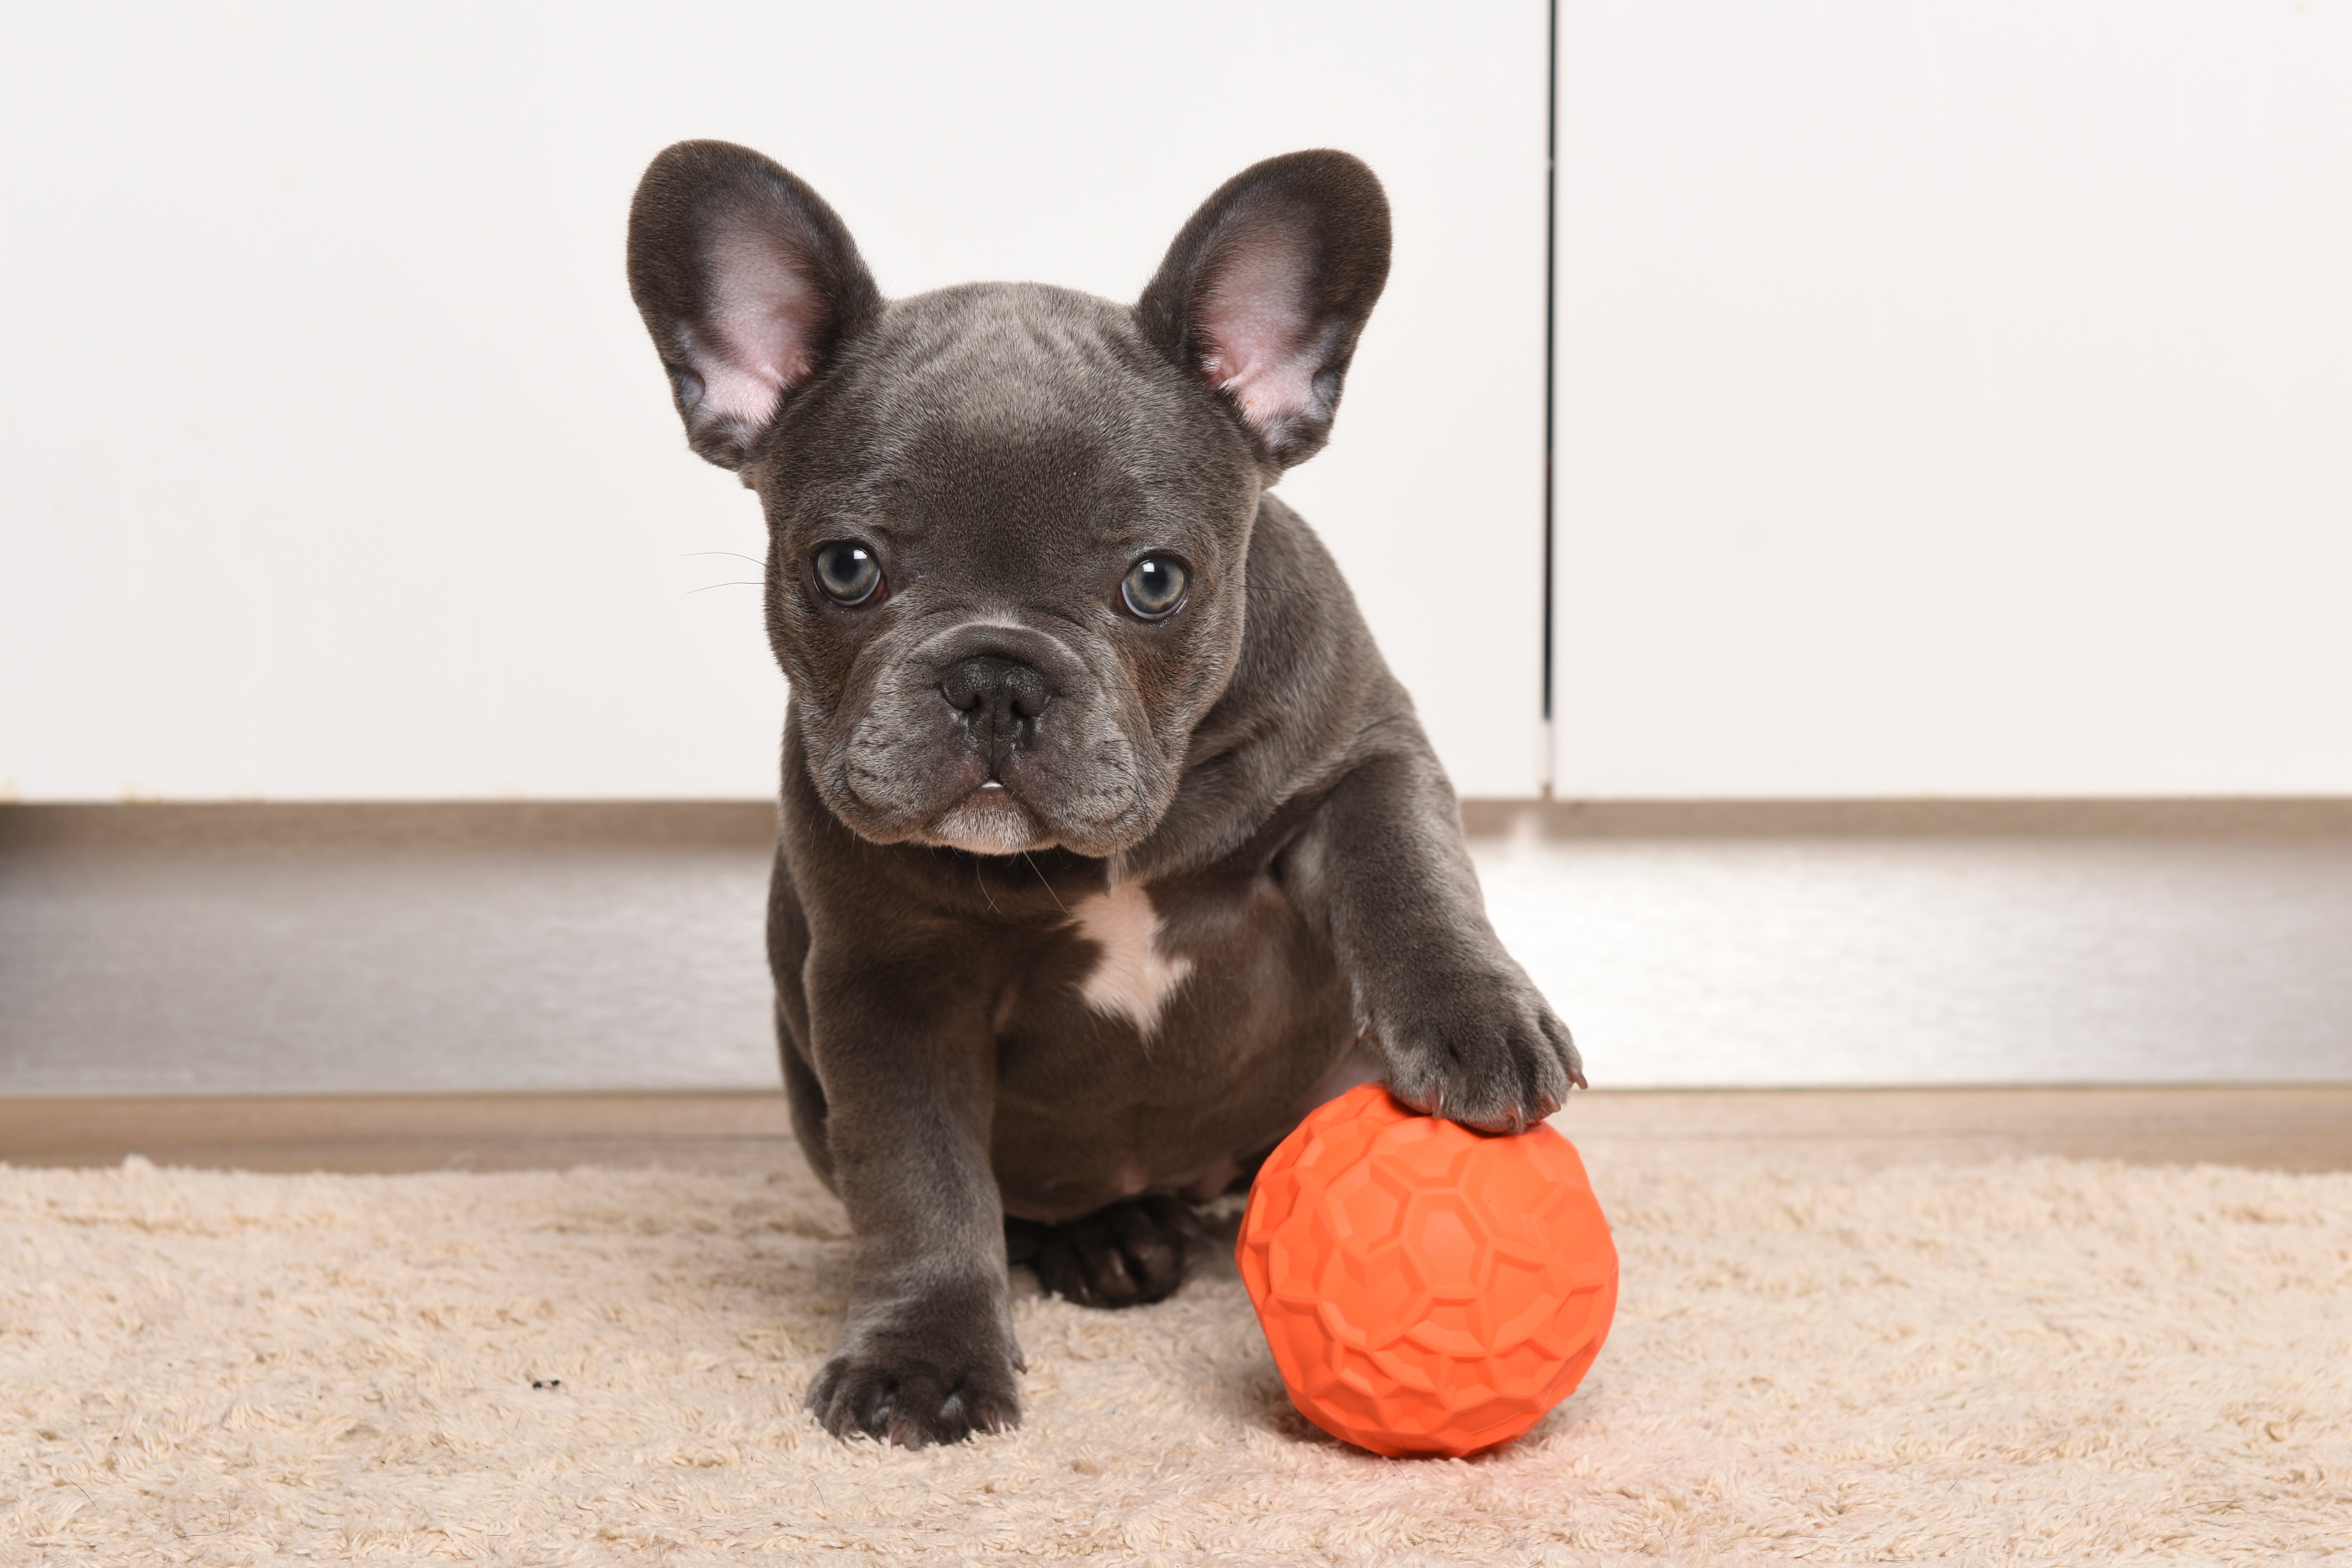 Games to Entertain Your Dog